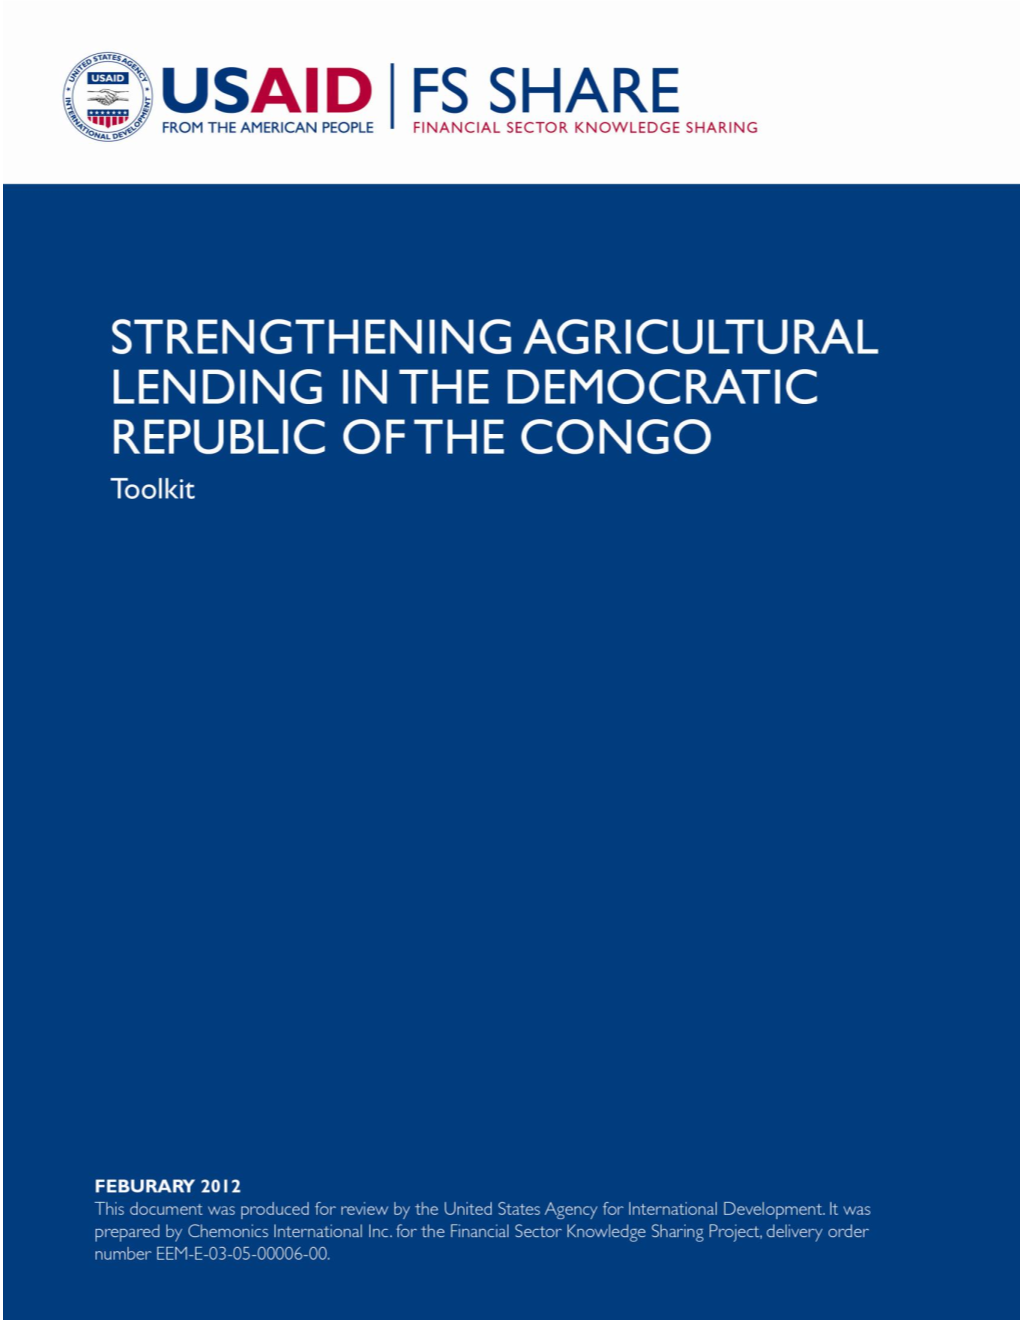 Strengthening Agricultural Lending in the Democratic Republic of Congo